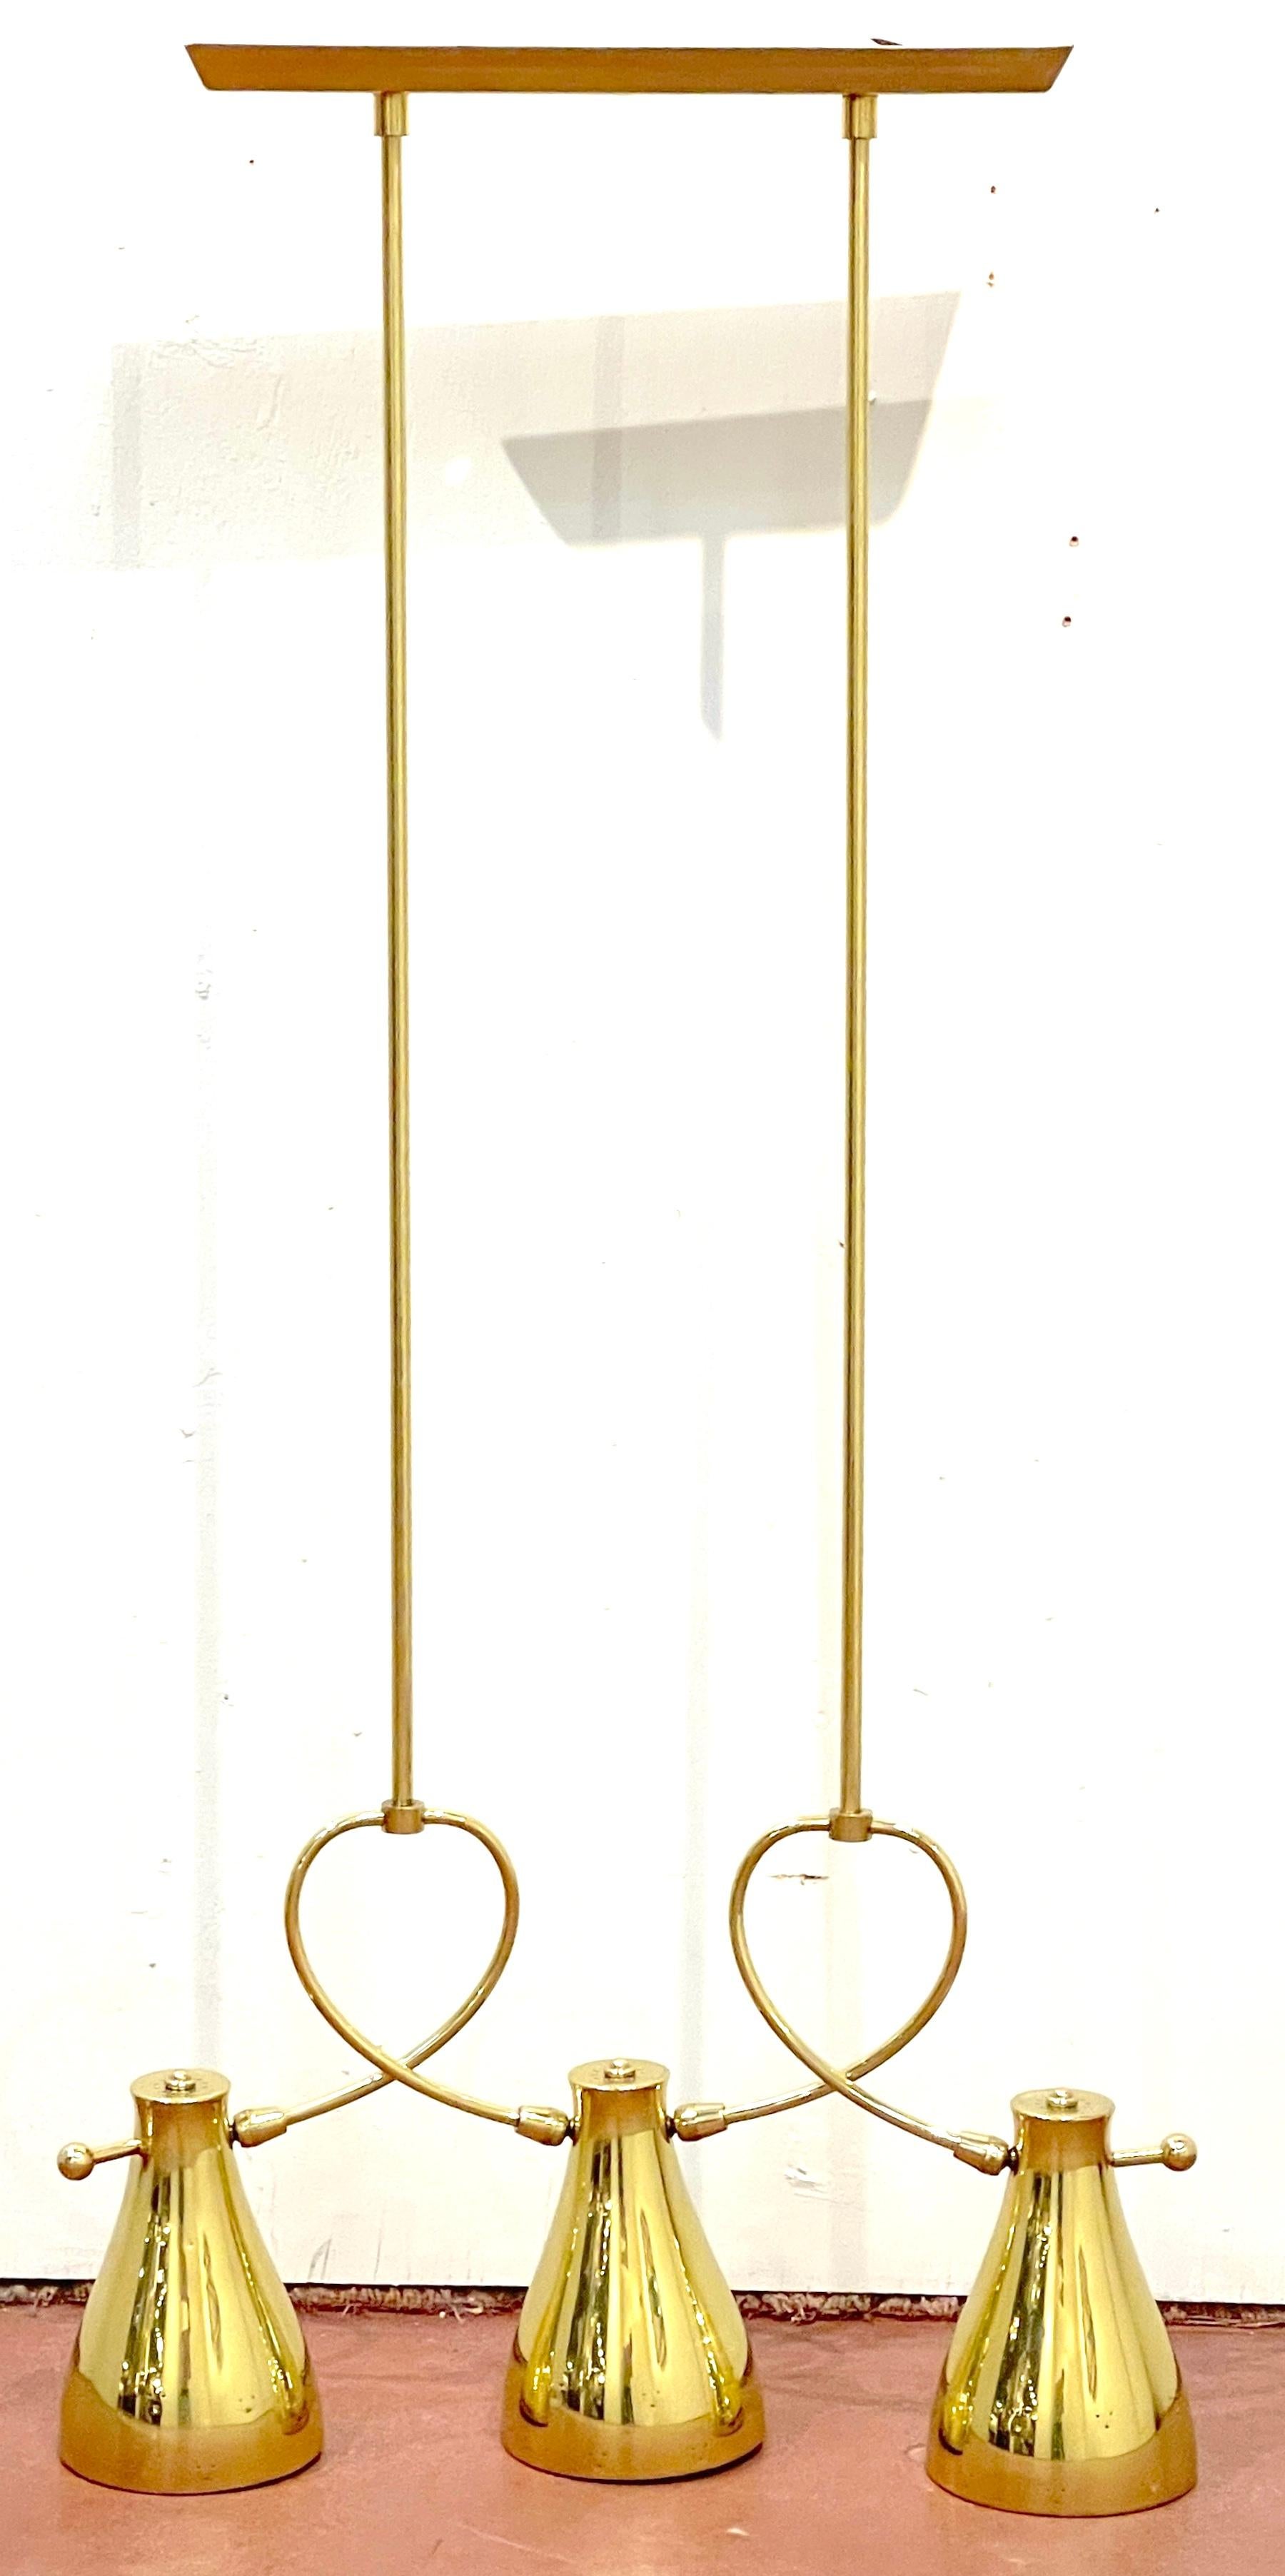 Paavo Tynell for Lightolier, Large Brass Pendant Lamp/ Chandelier, 1950s
USA, 20th Century

An exceptional design, this Paavo Tynell for Lightolier Large Brass Pendant Lamp/Chandelier, a true gem from the mid-20th century. Designed with tailored